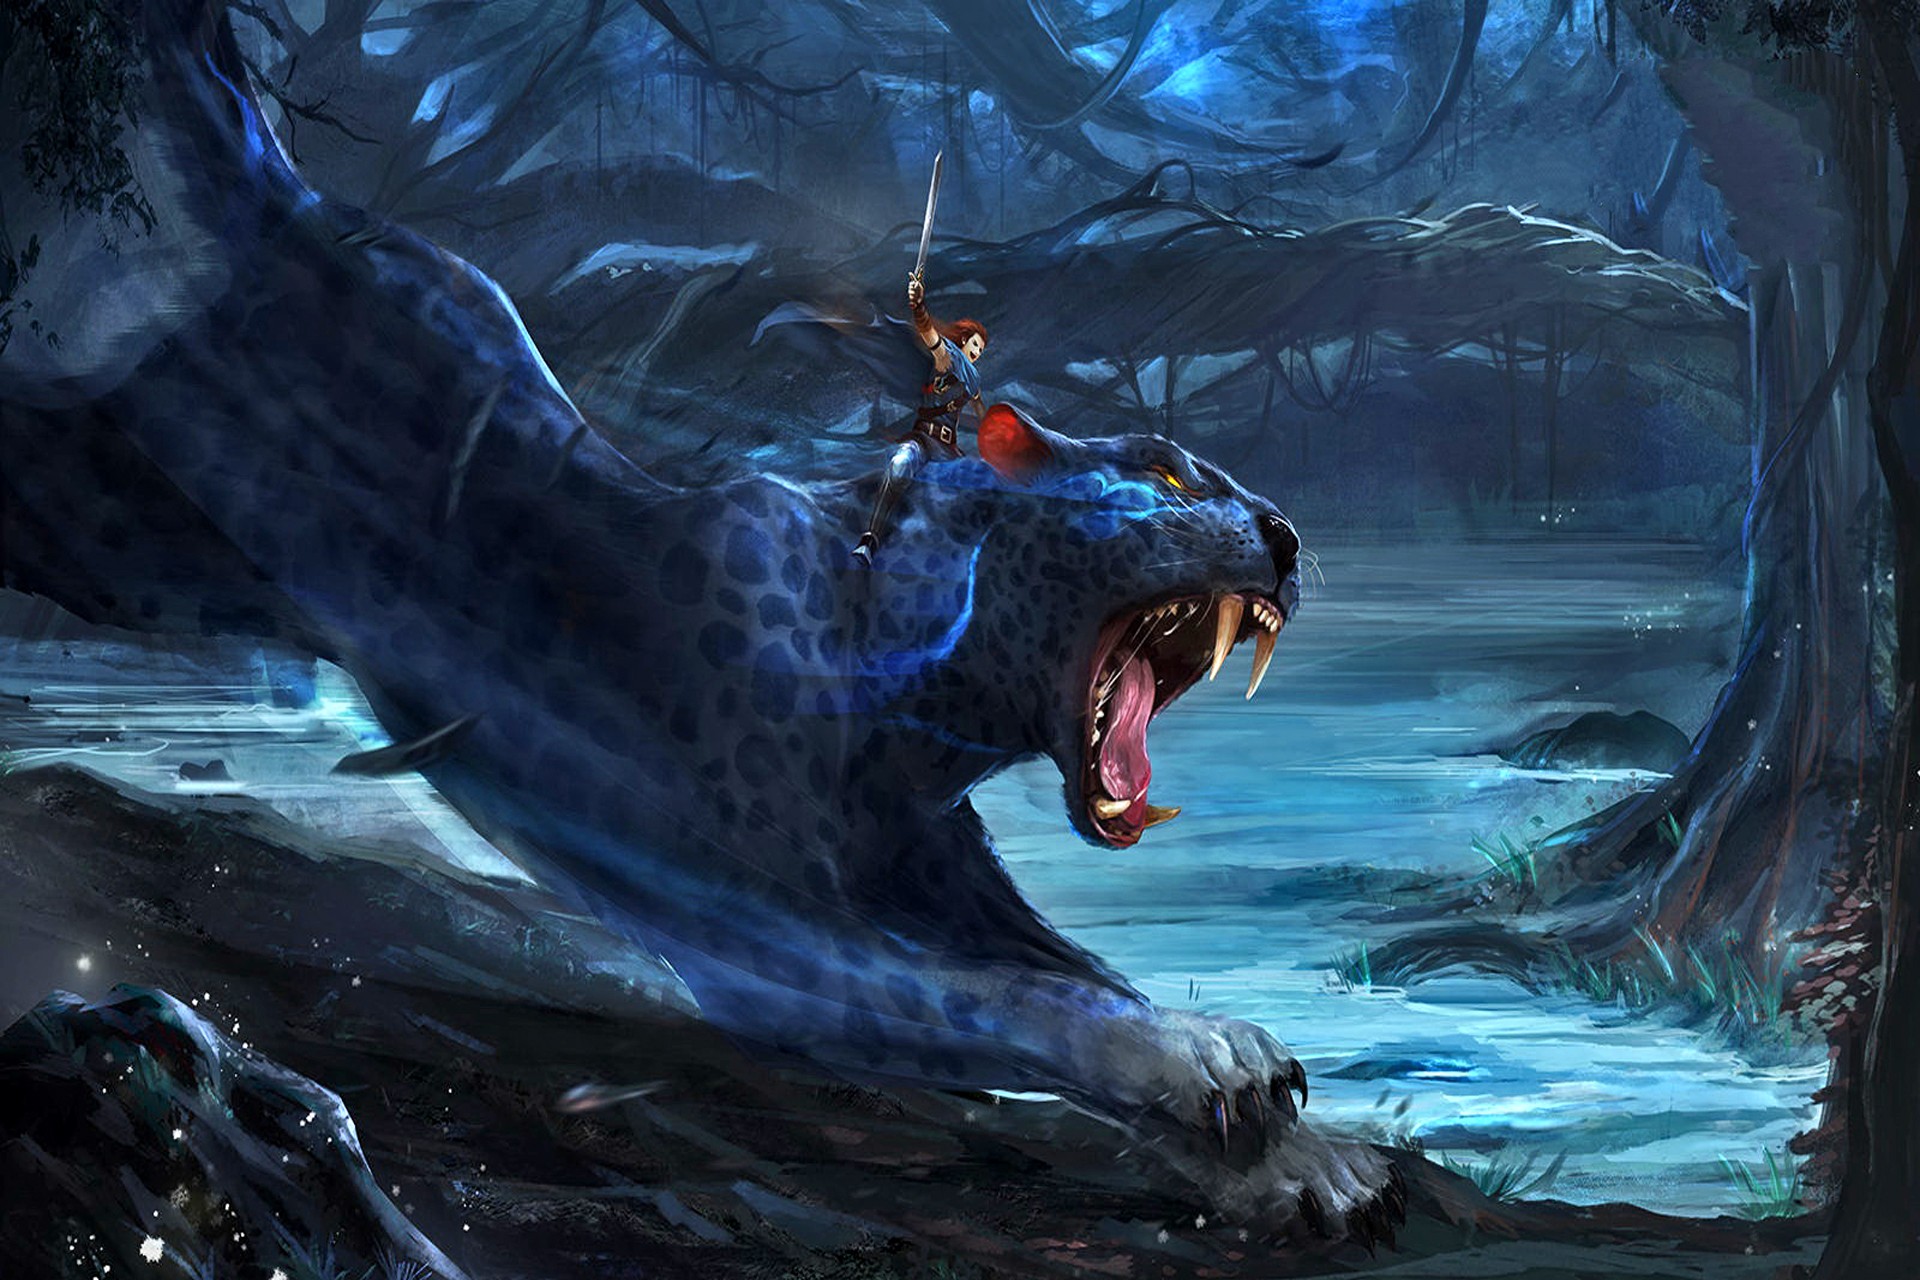 cat pictures for wallpaper,dragon,cg artwork,mythology,action adventure game,mythical creature